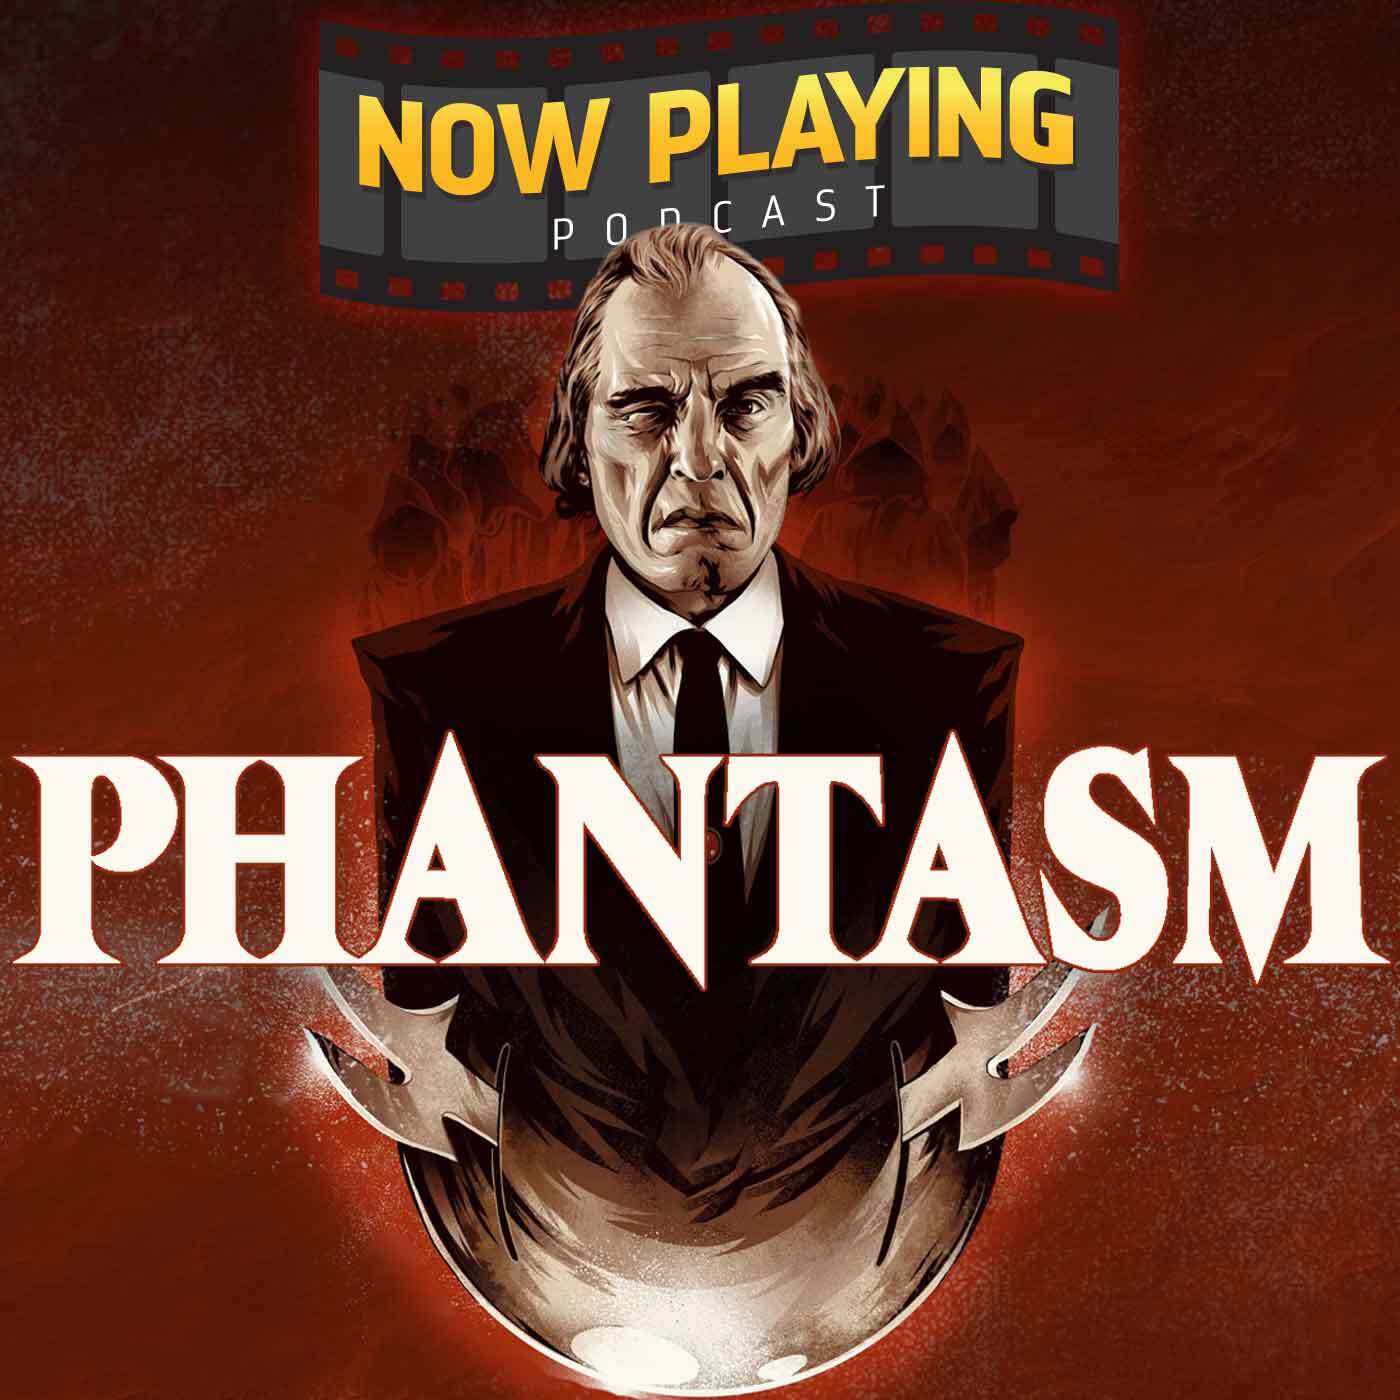 Phantasm - for Annual Subscribers